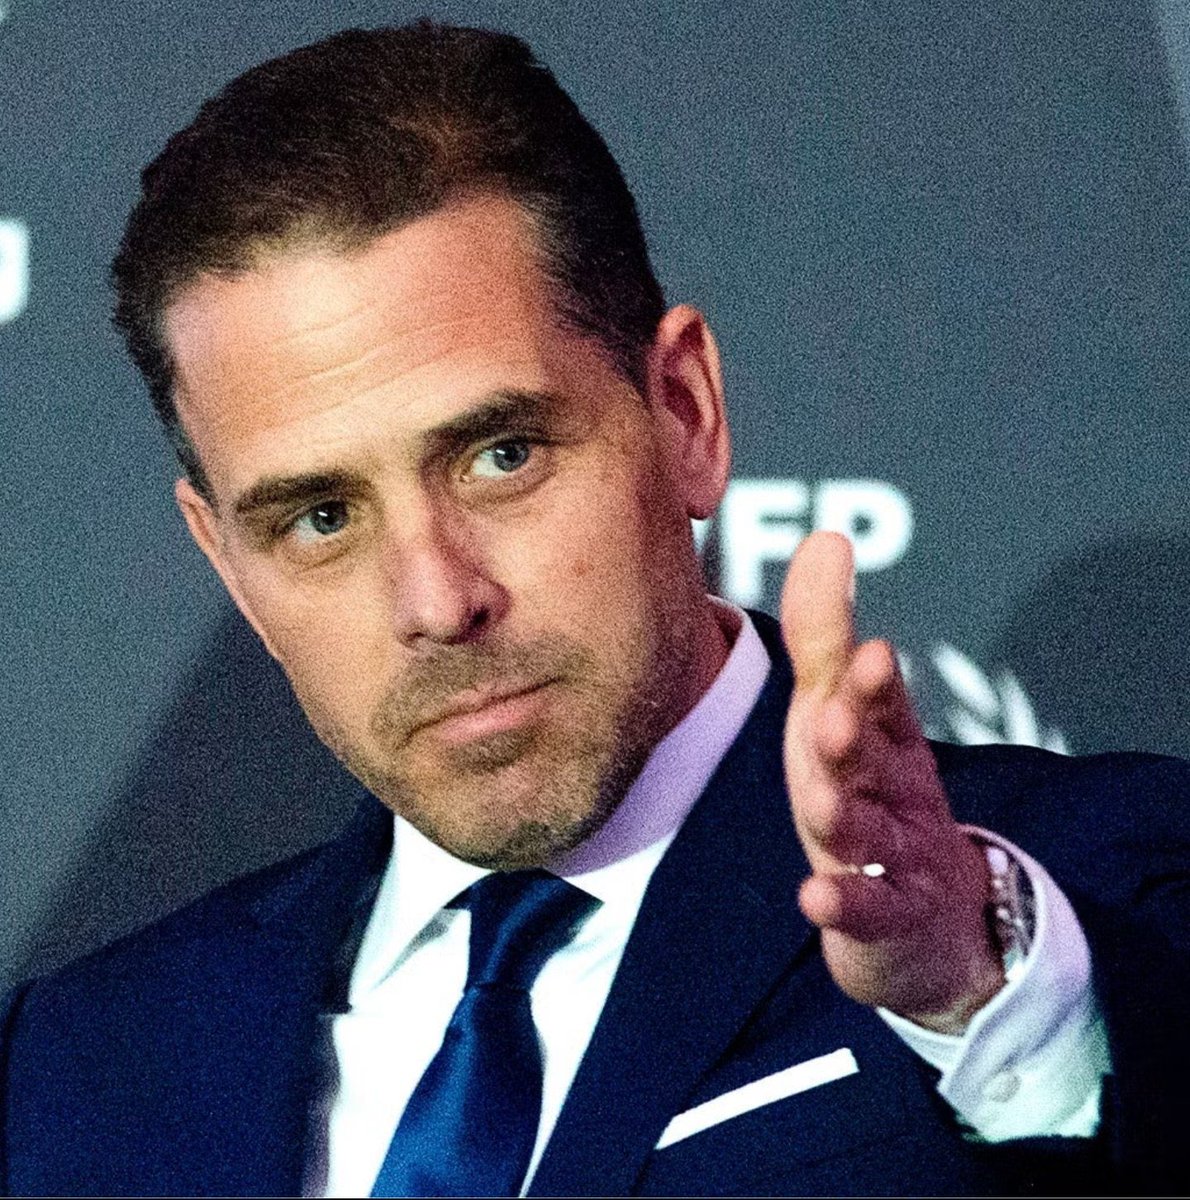 Do you agree with Hunter Biden suing Fox News for Defamation of Character? Yes or No